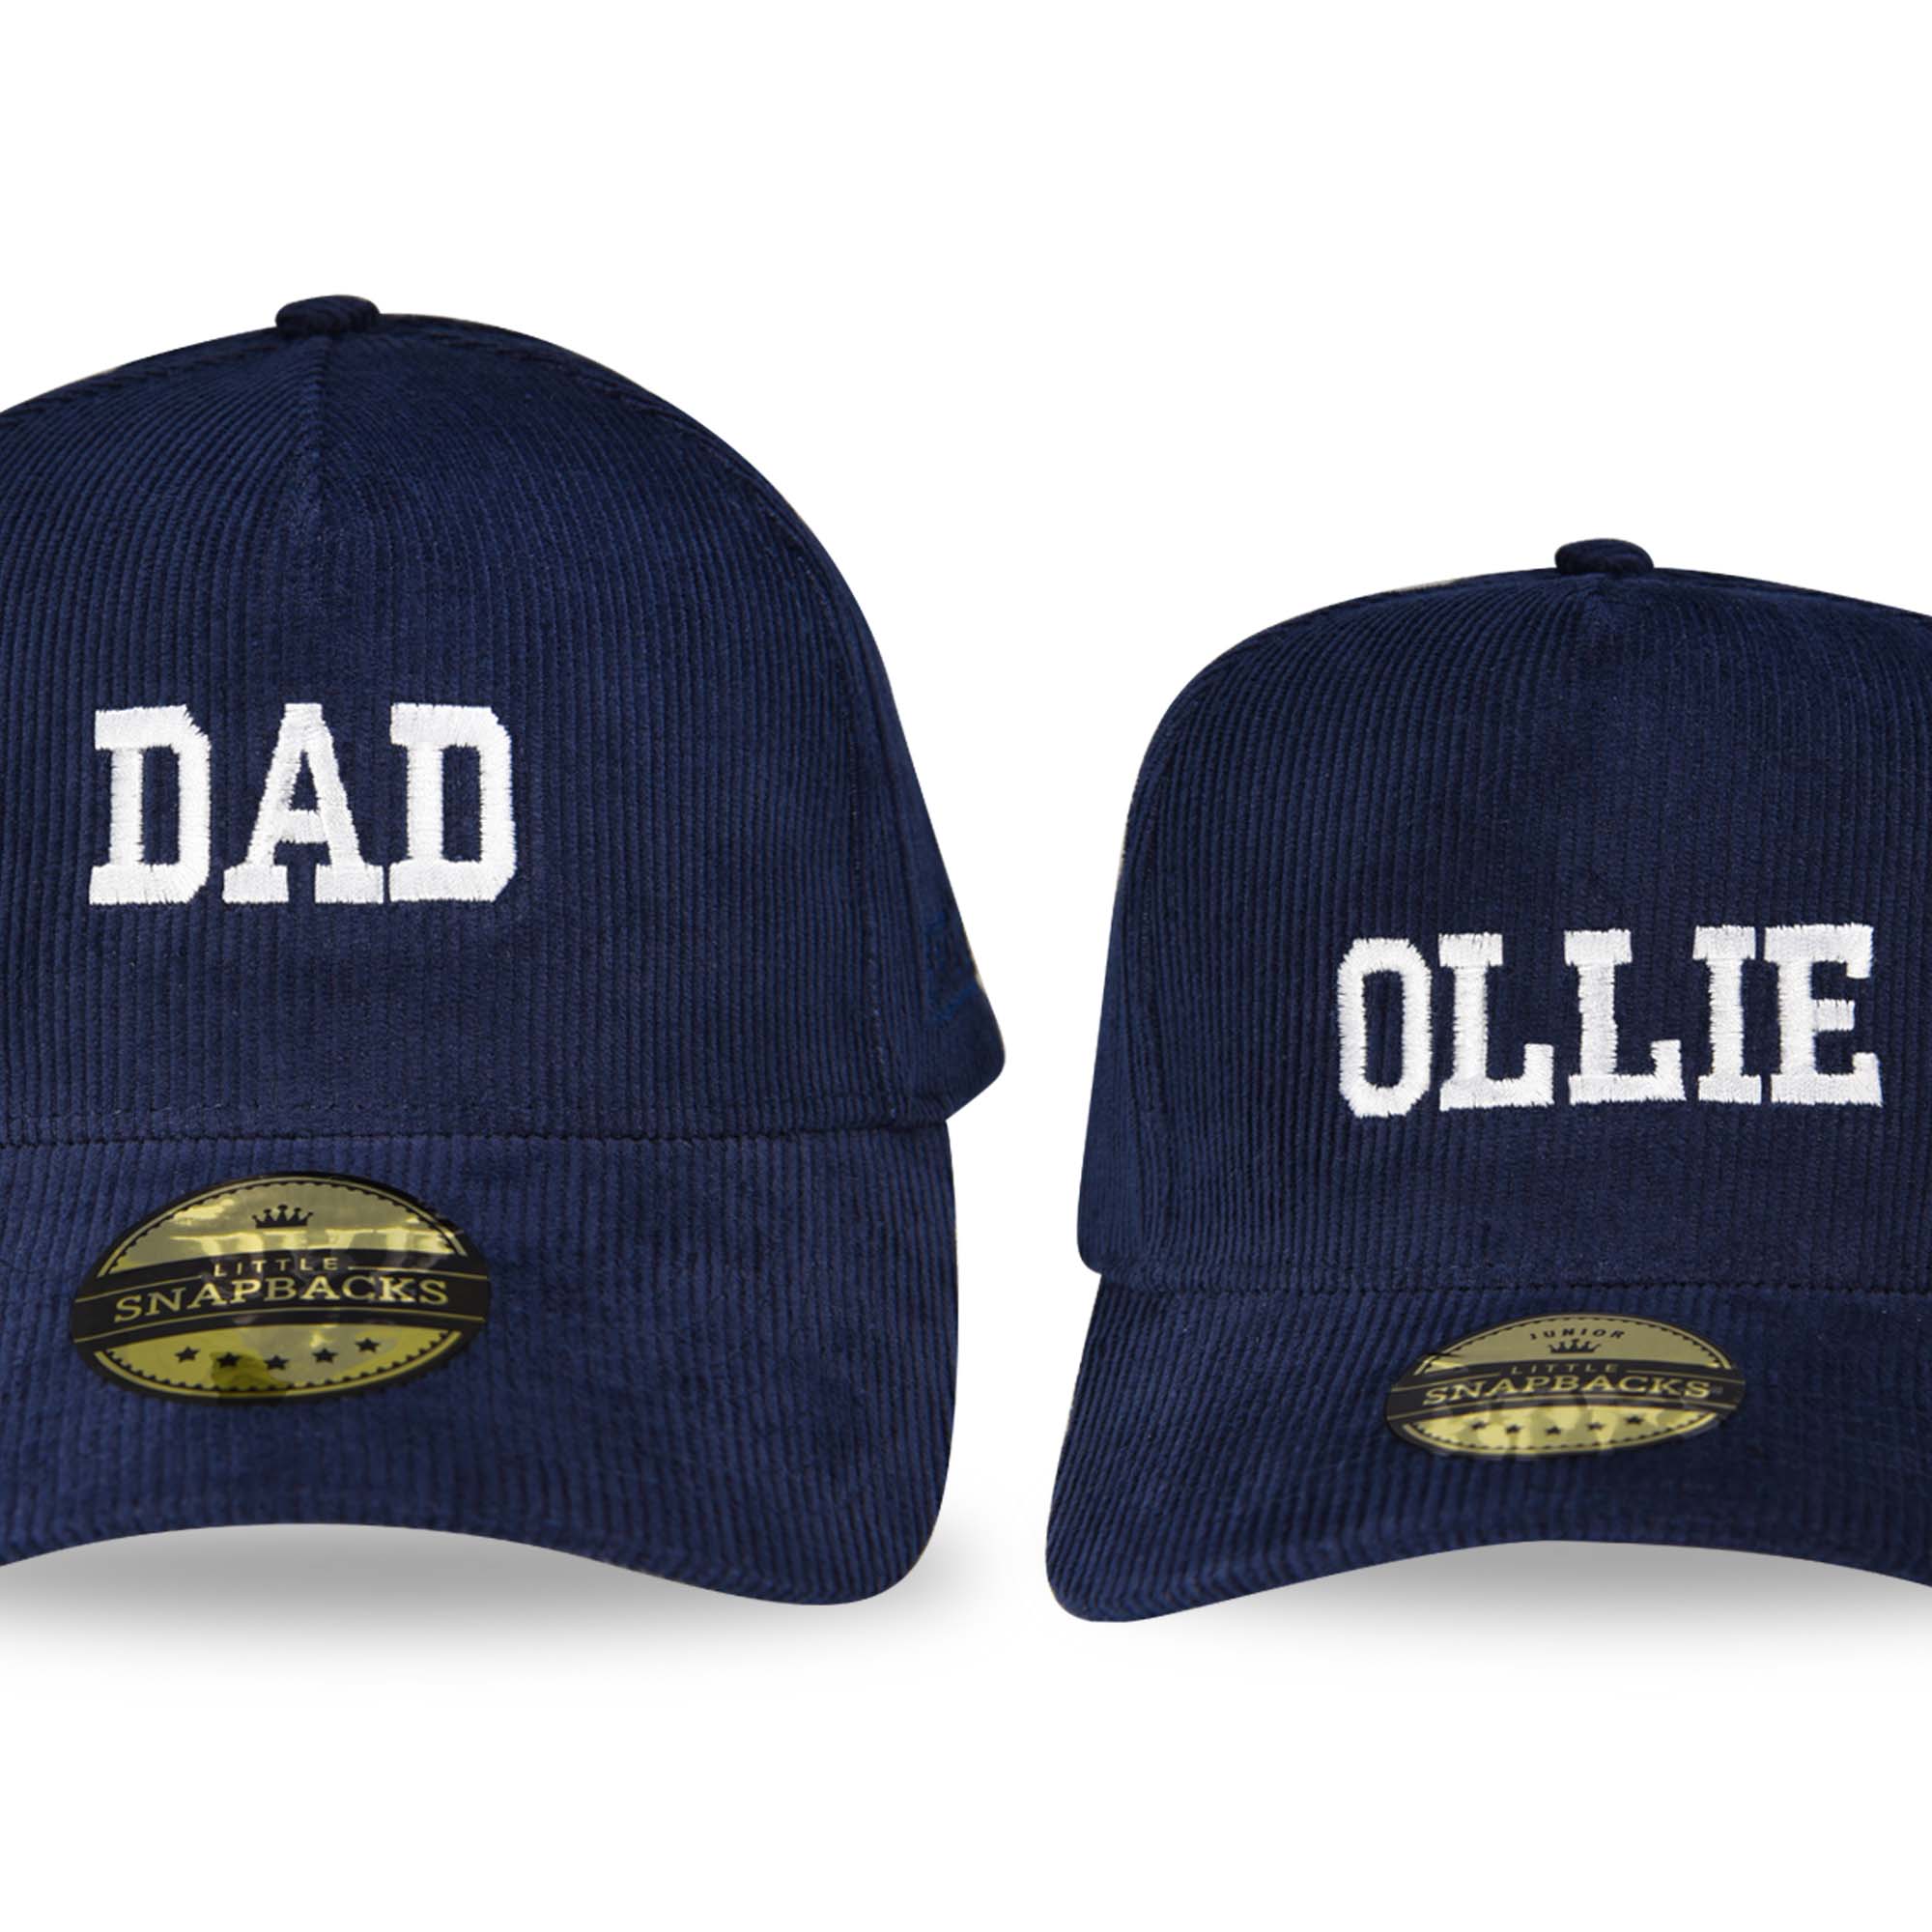 Matching Adult and son hats - Navy Cord Snapback